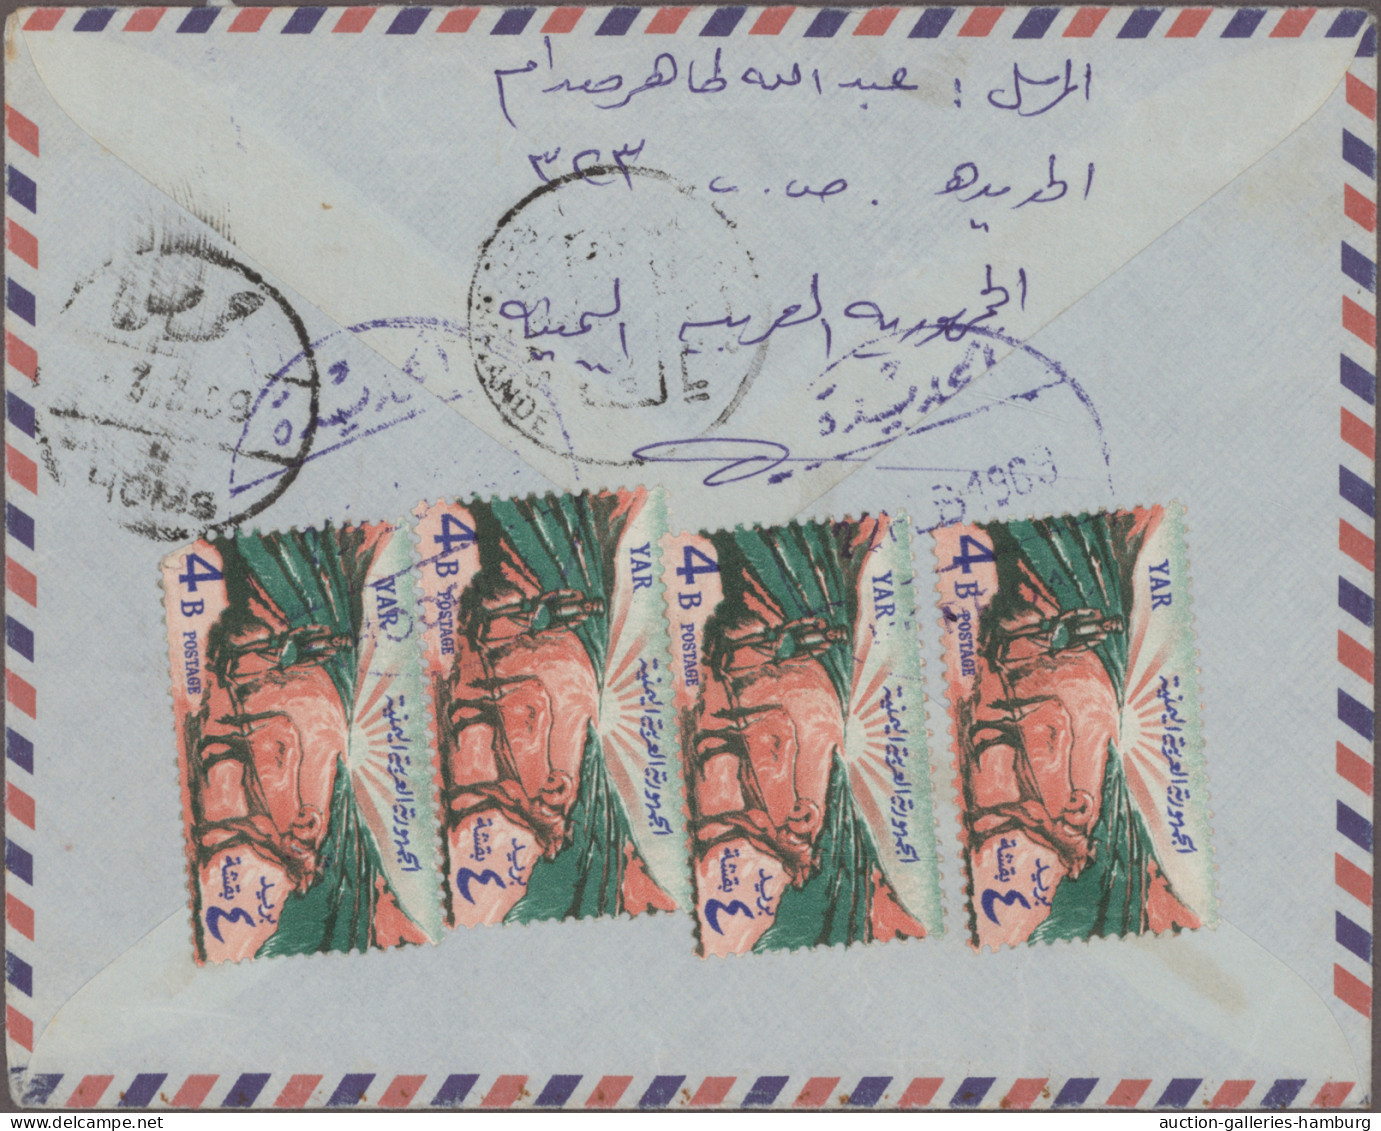 Yemen: 1968/1975, lot of 16 domestic commercial covers incl. registered mail, in